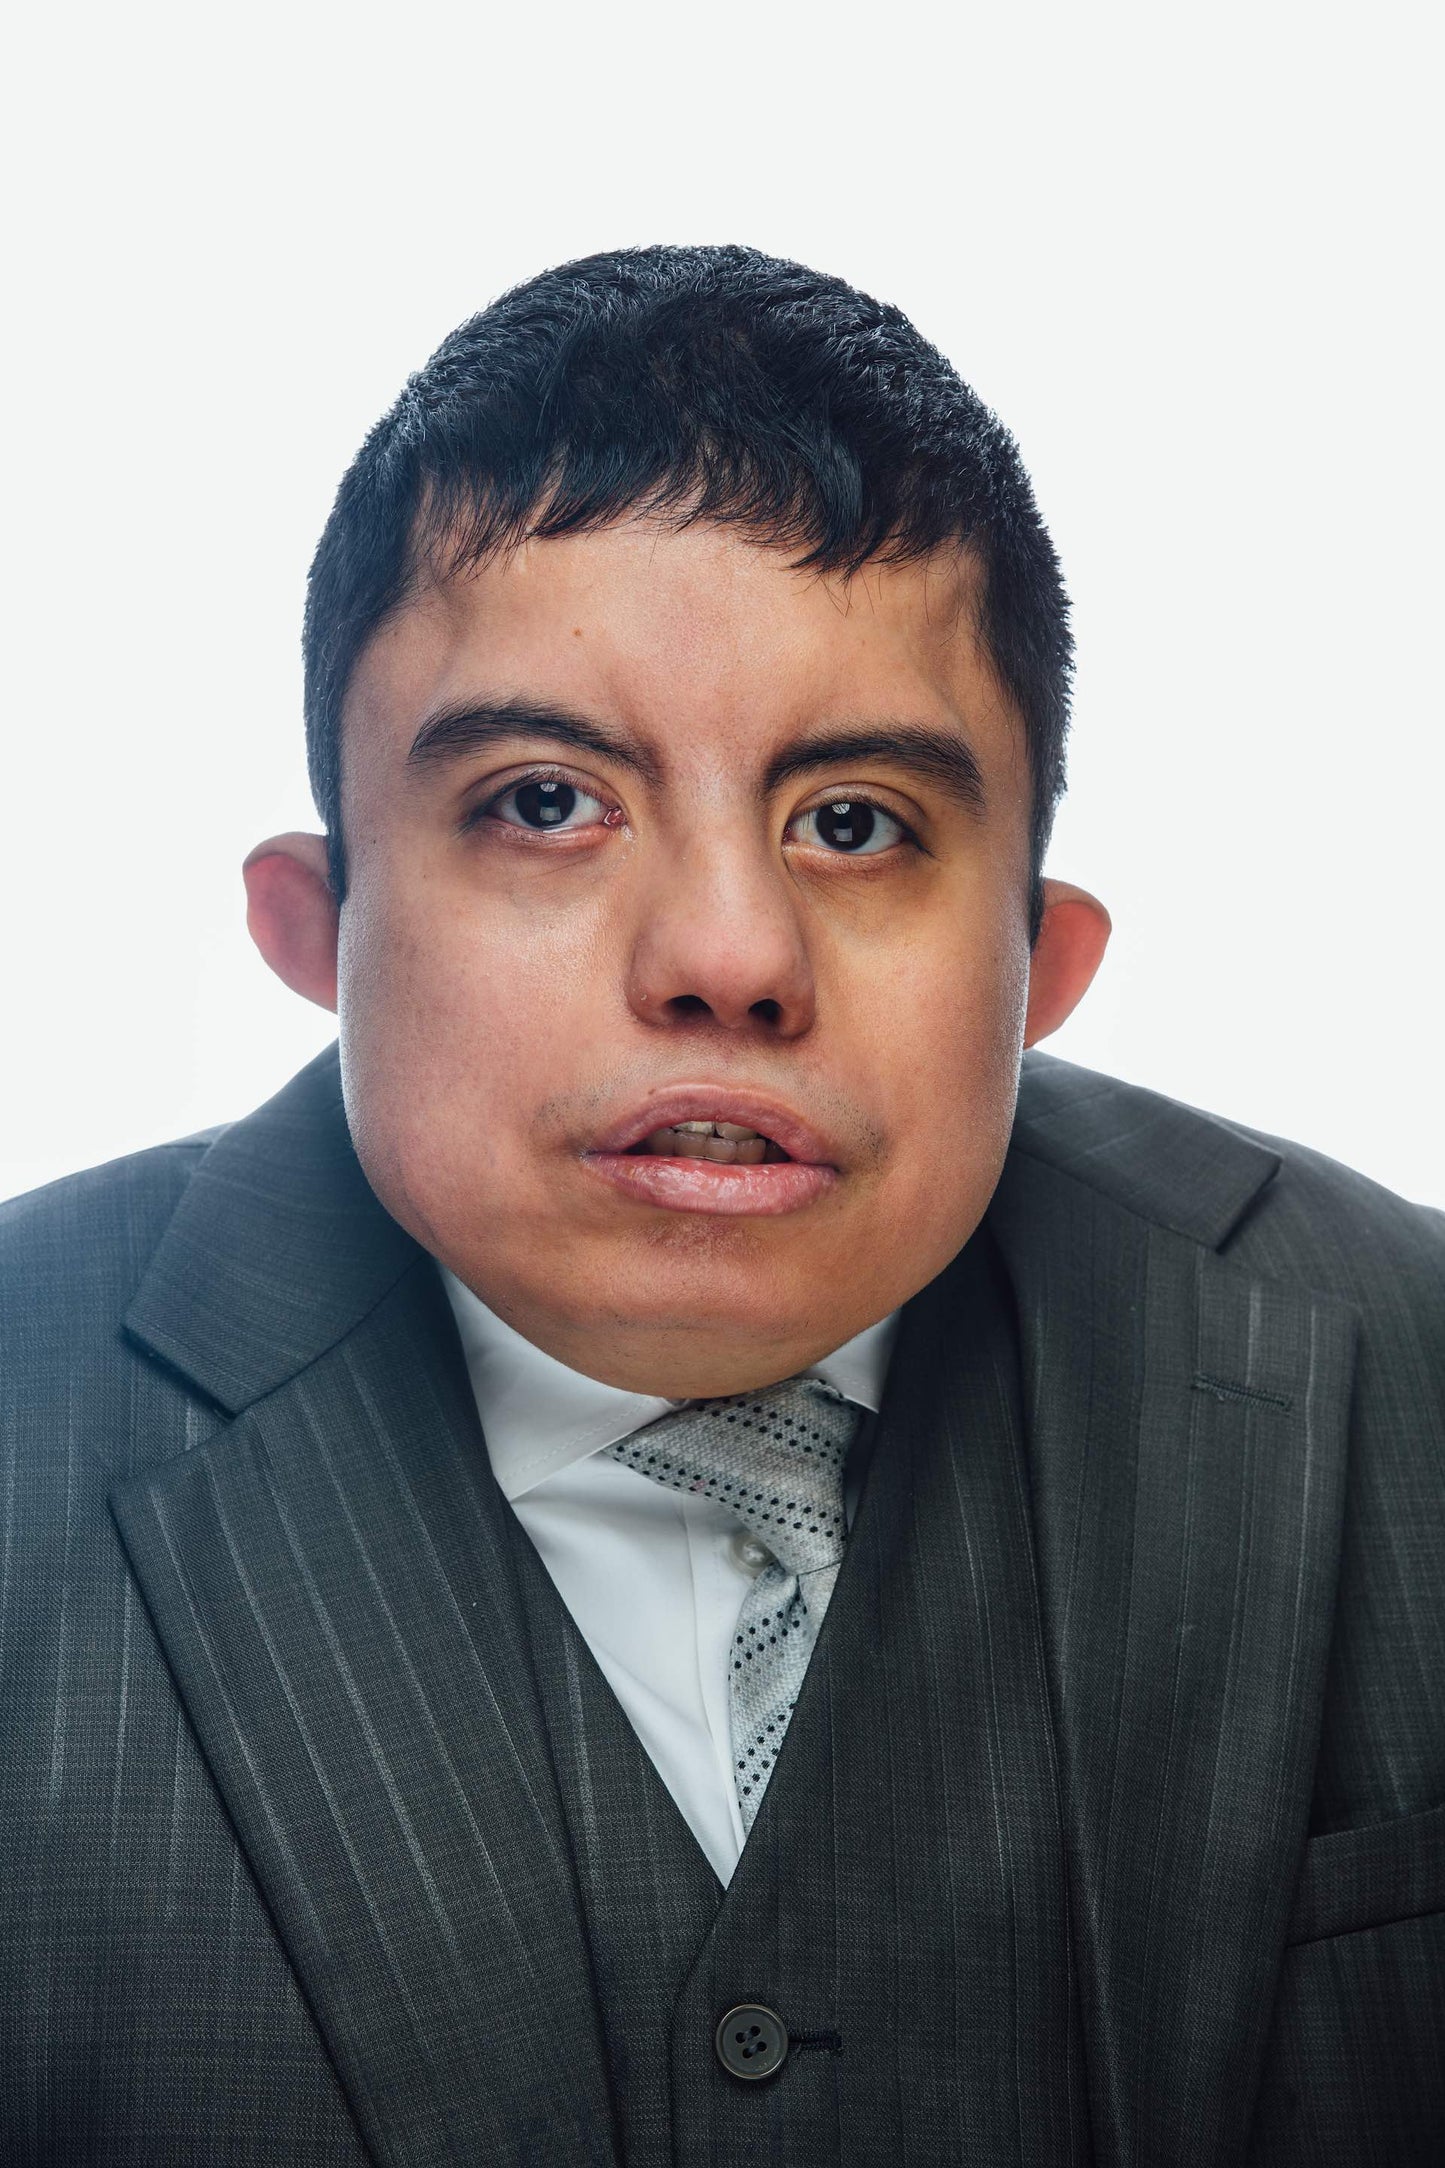 Young Hispanic man wearing a suit and gazing into camera